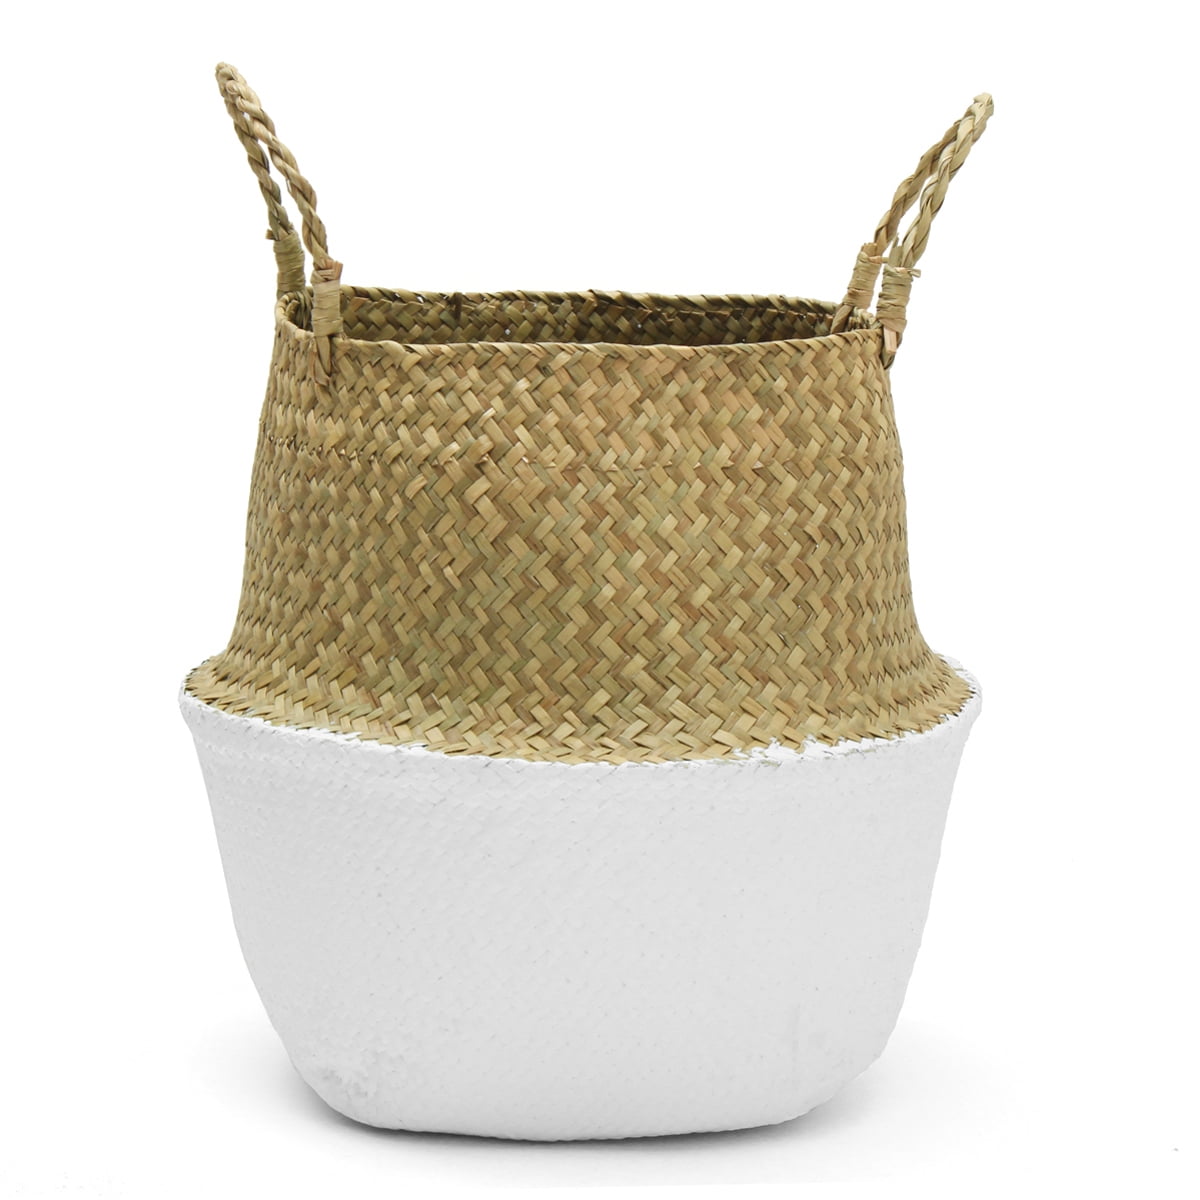 Details about   Seagrass Belly Basket Storage Plant Pot Foldable Nursery Laundry Bags Home Decor